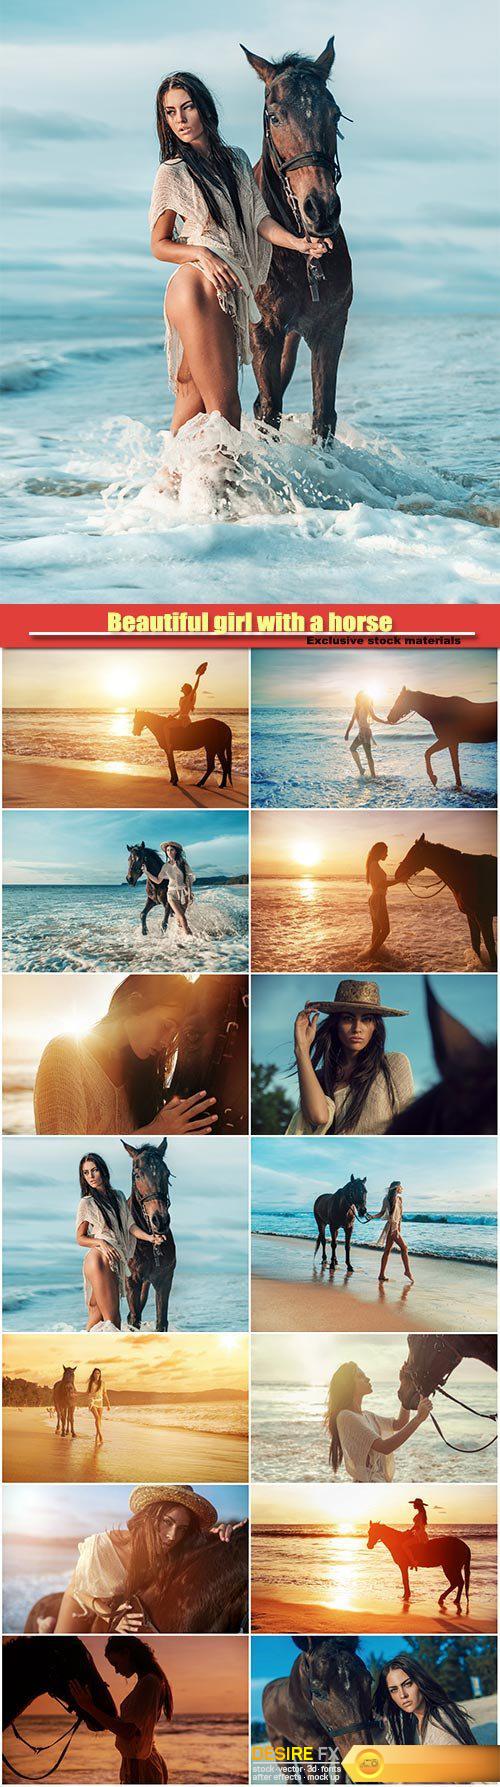 Beautiful girl with a horse on the beach